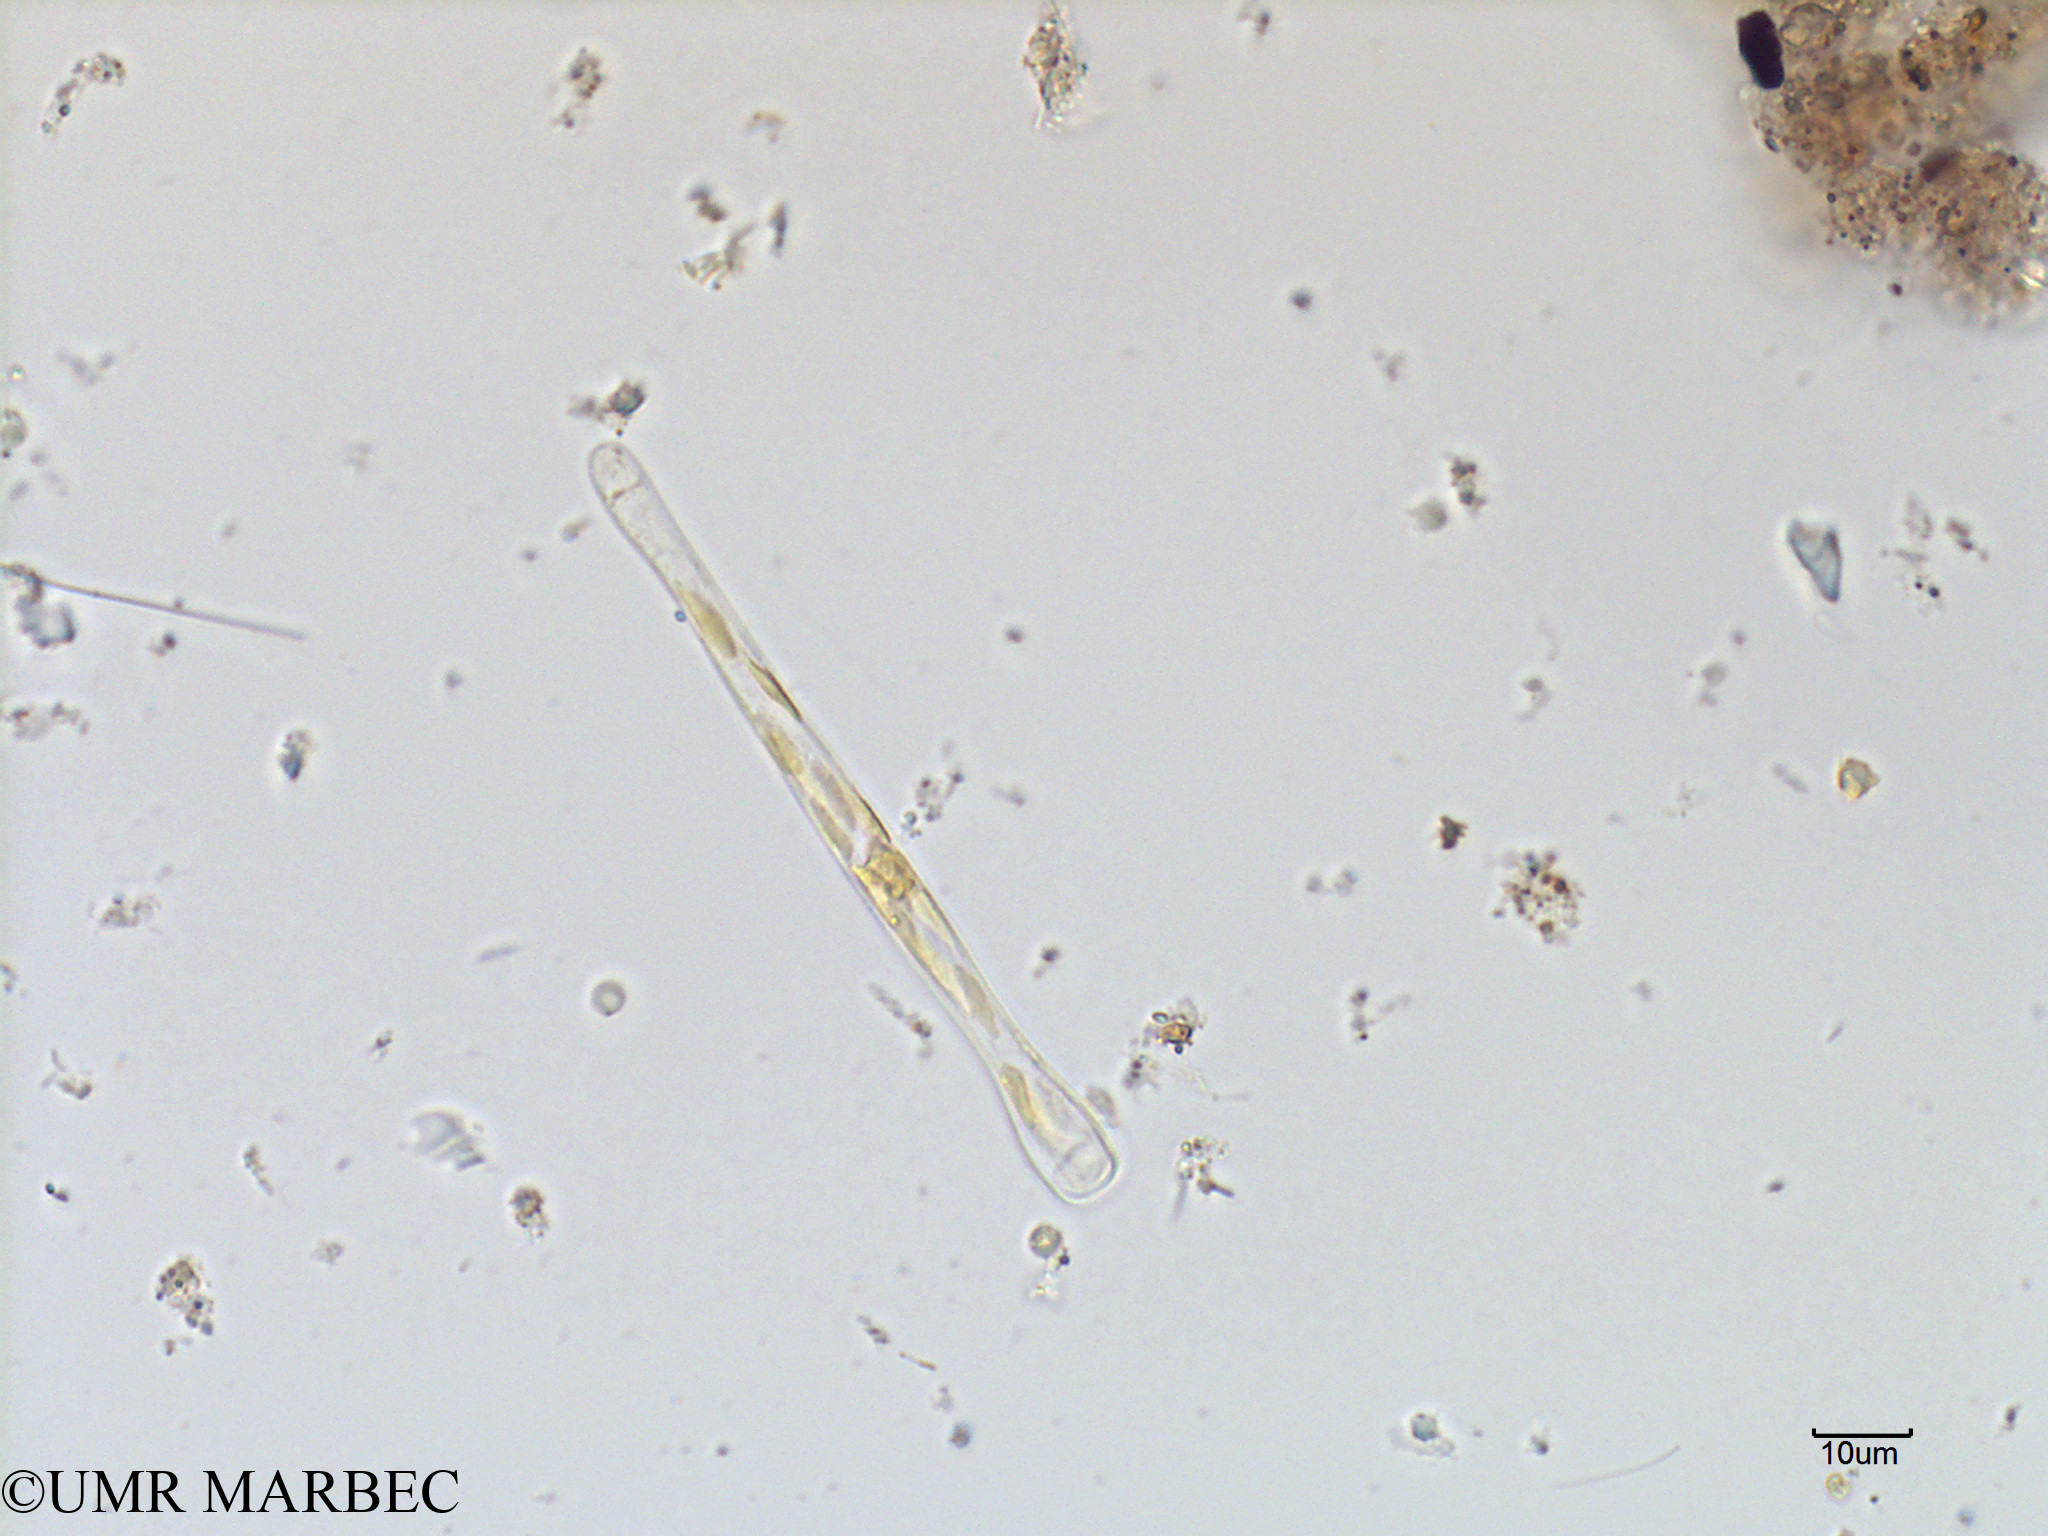 phyto/Scattered_Islands/mayotte_lagoon/SIREME May 2016/Asterionella sp3 (MAY4_tipo asterionella-5).tif(copy).jpg